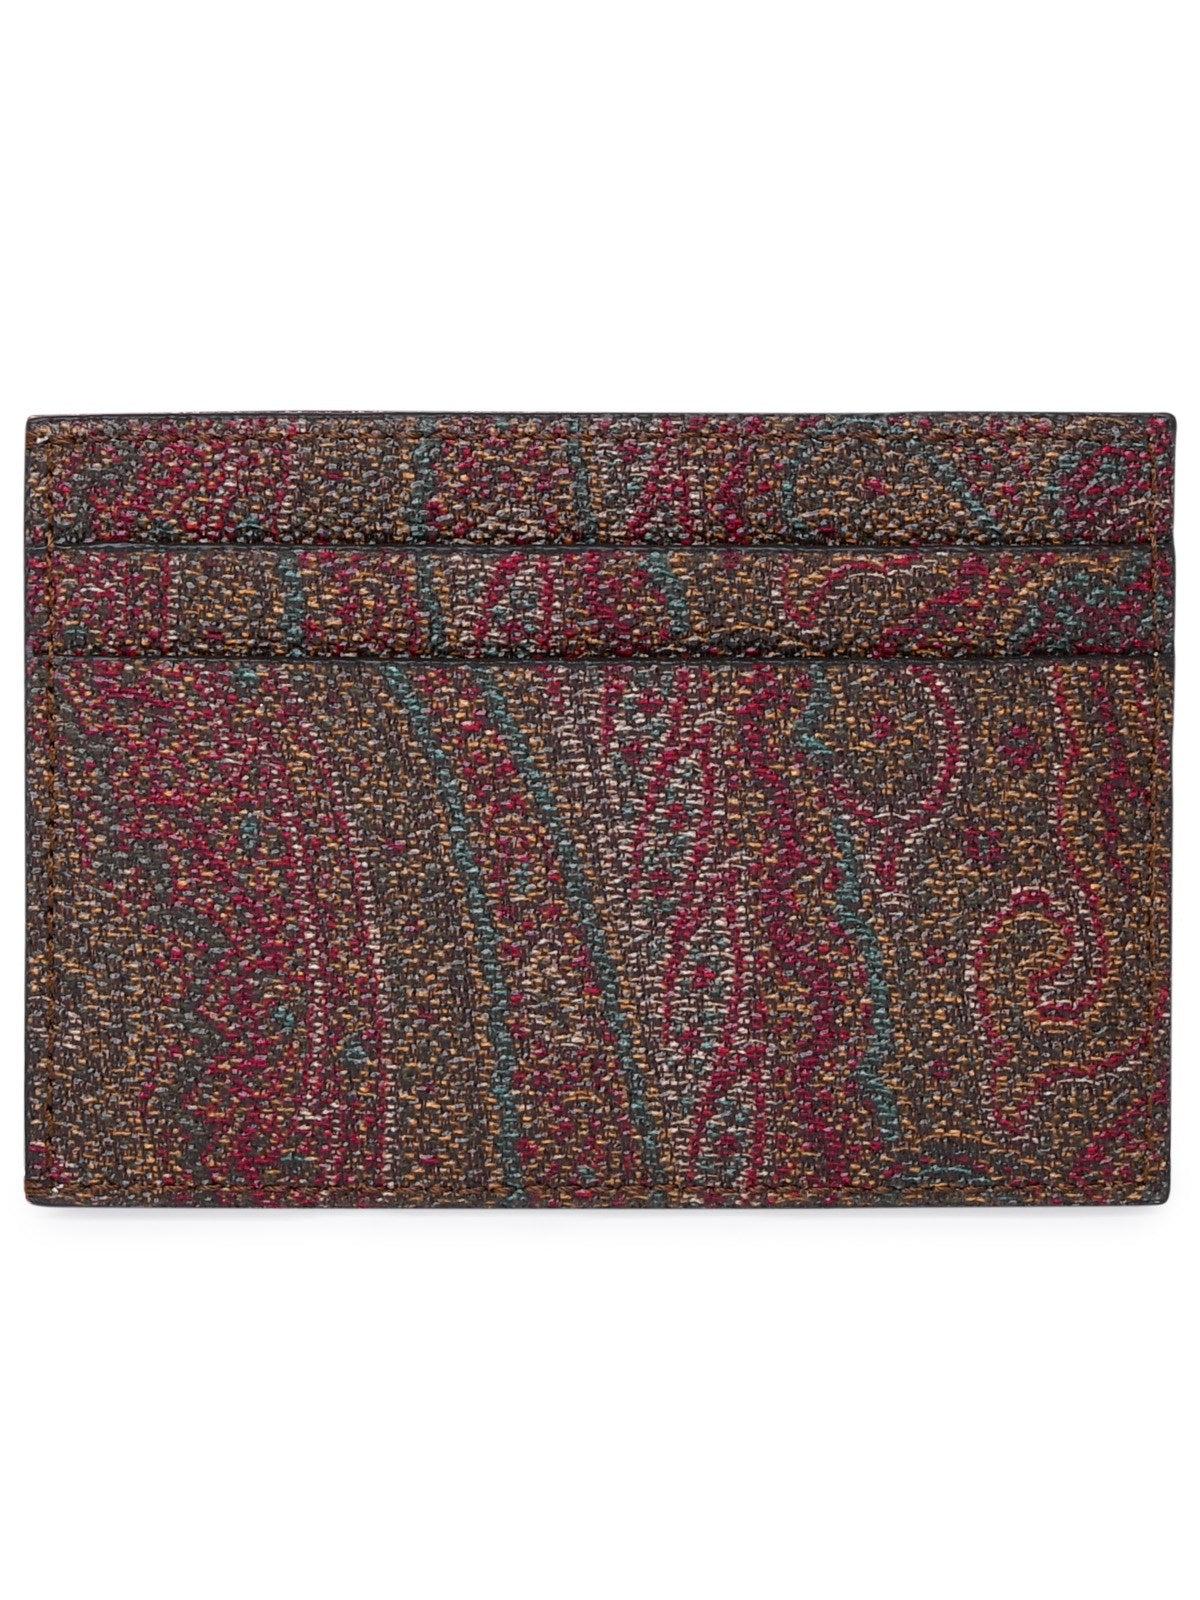 Etro Cotton Blend Card Holder in Red for Men Mens Accessories Wallets and cardholders 